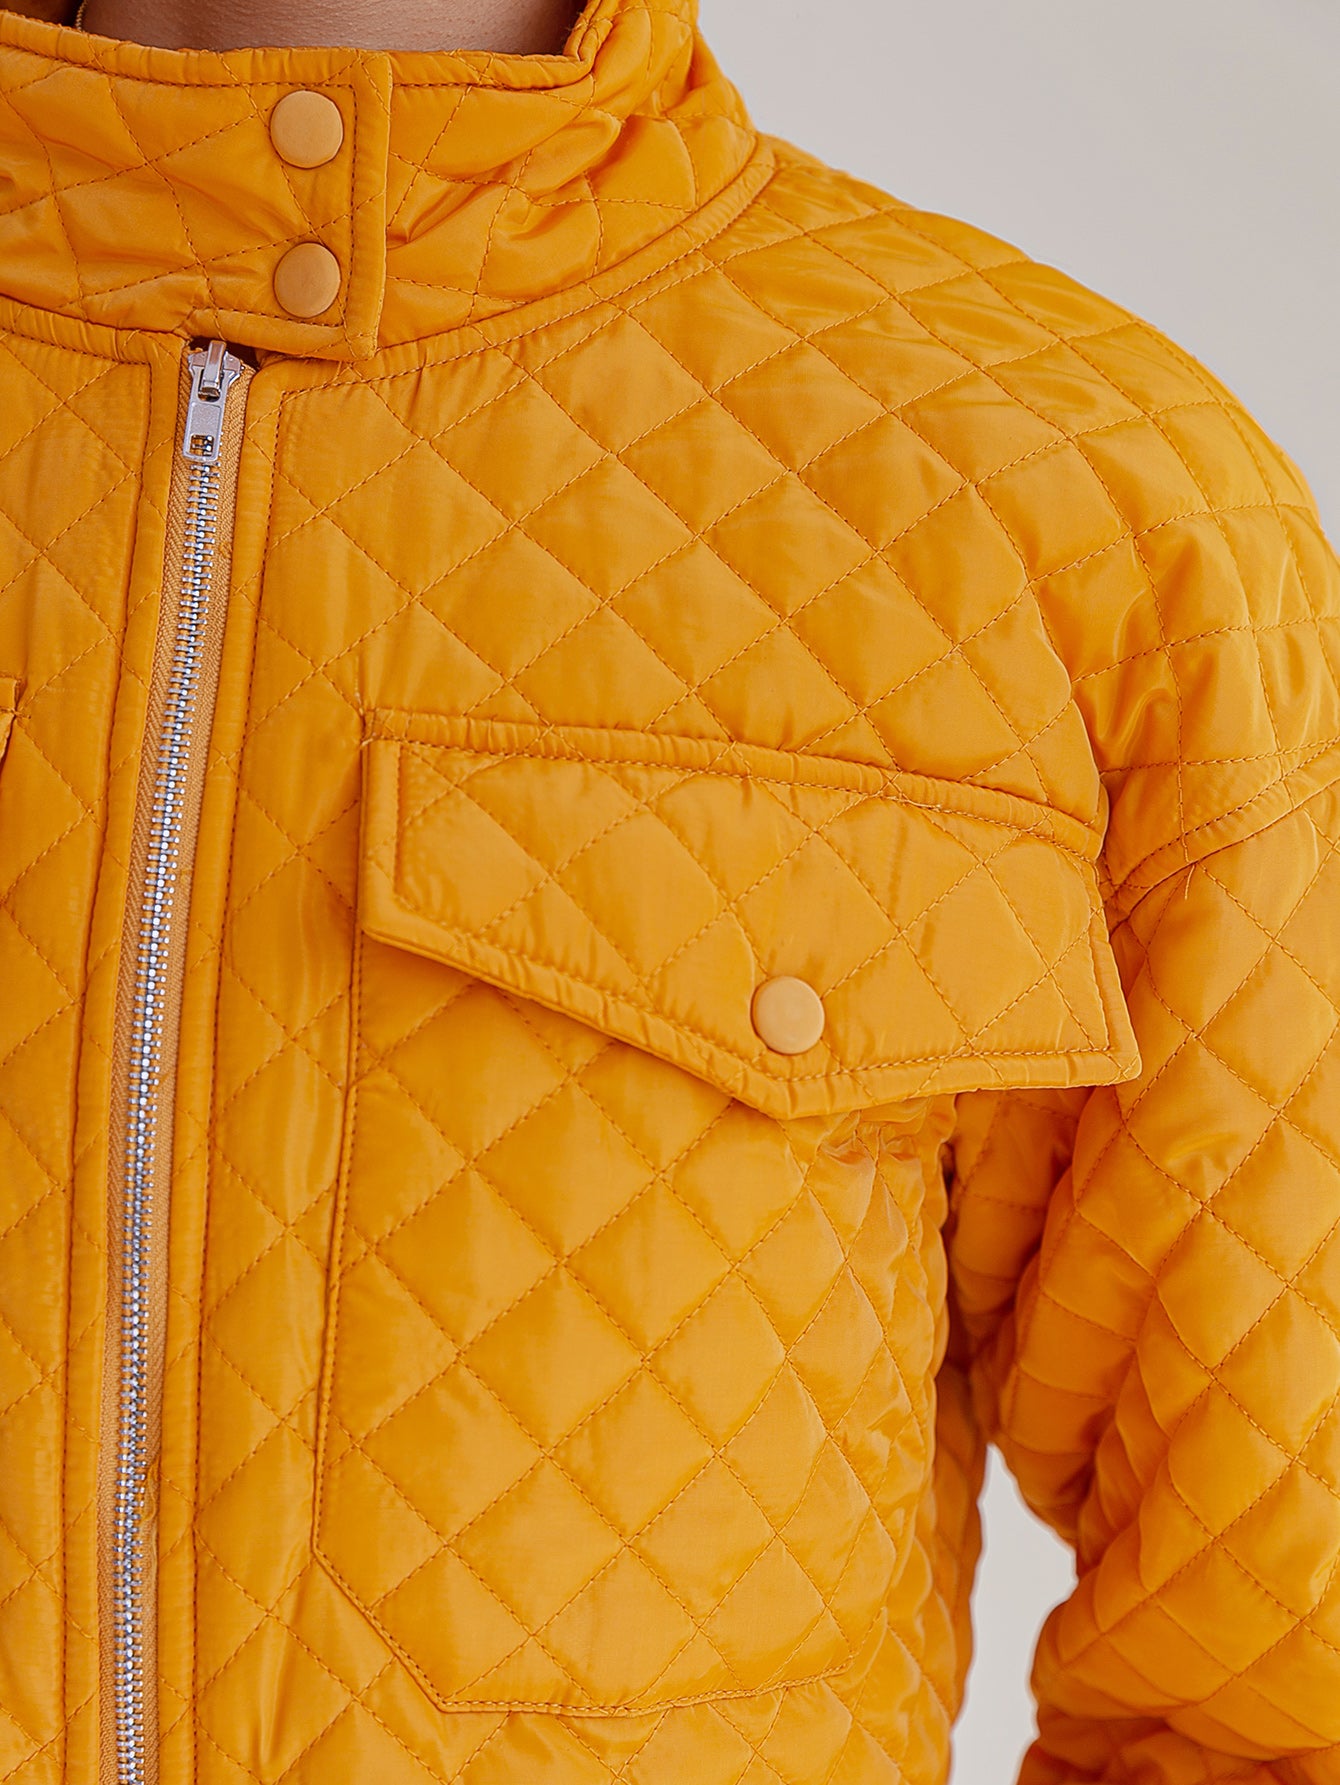 Quilted Zip Up Cropped Puffer Jacket Quilted Zip Up Cropped Puffer Jacket - M&R CORNERJacket M&R CORNER